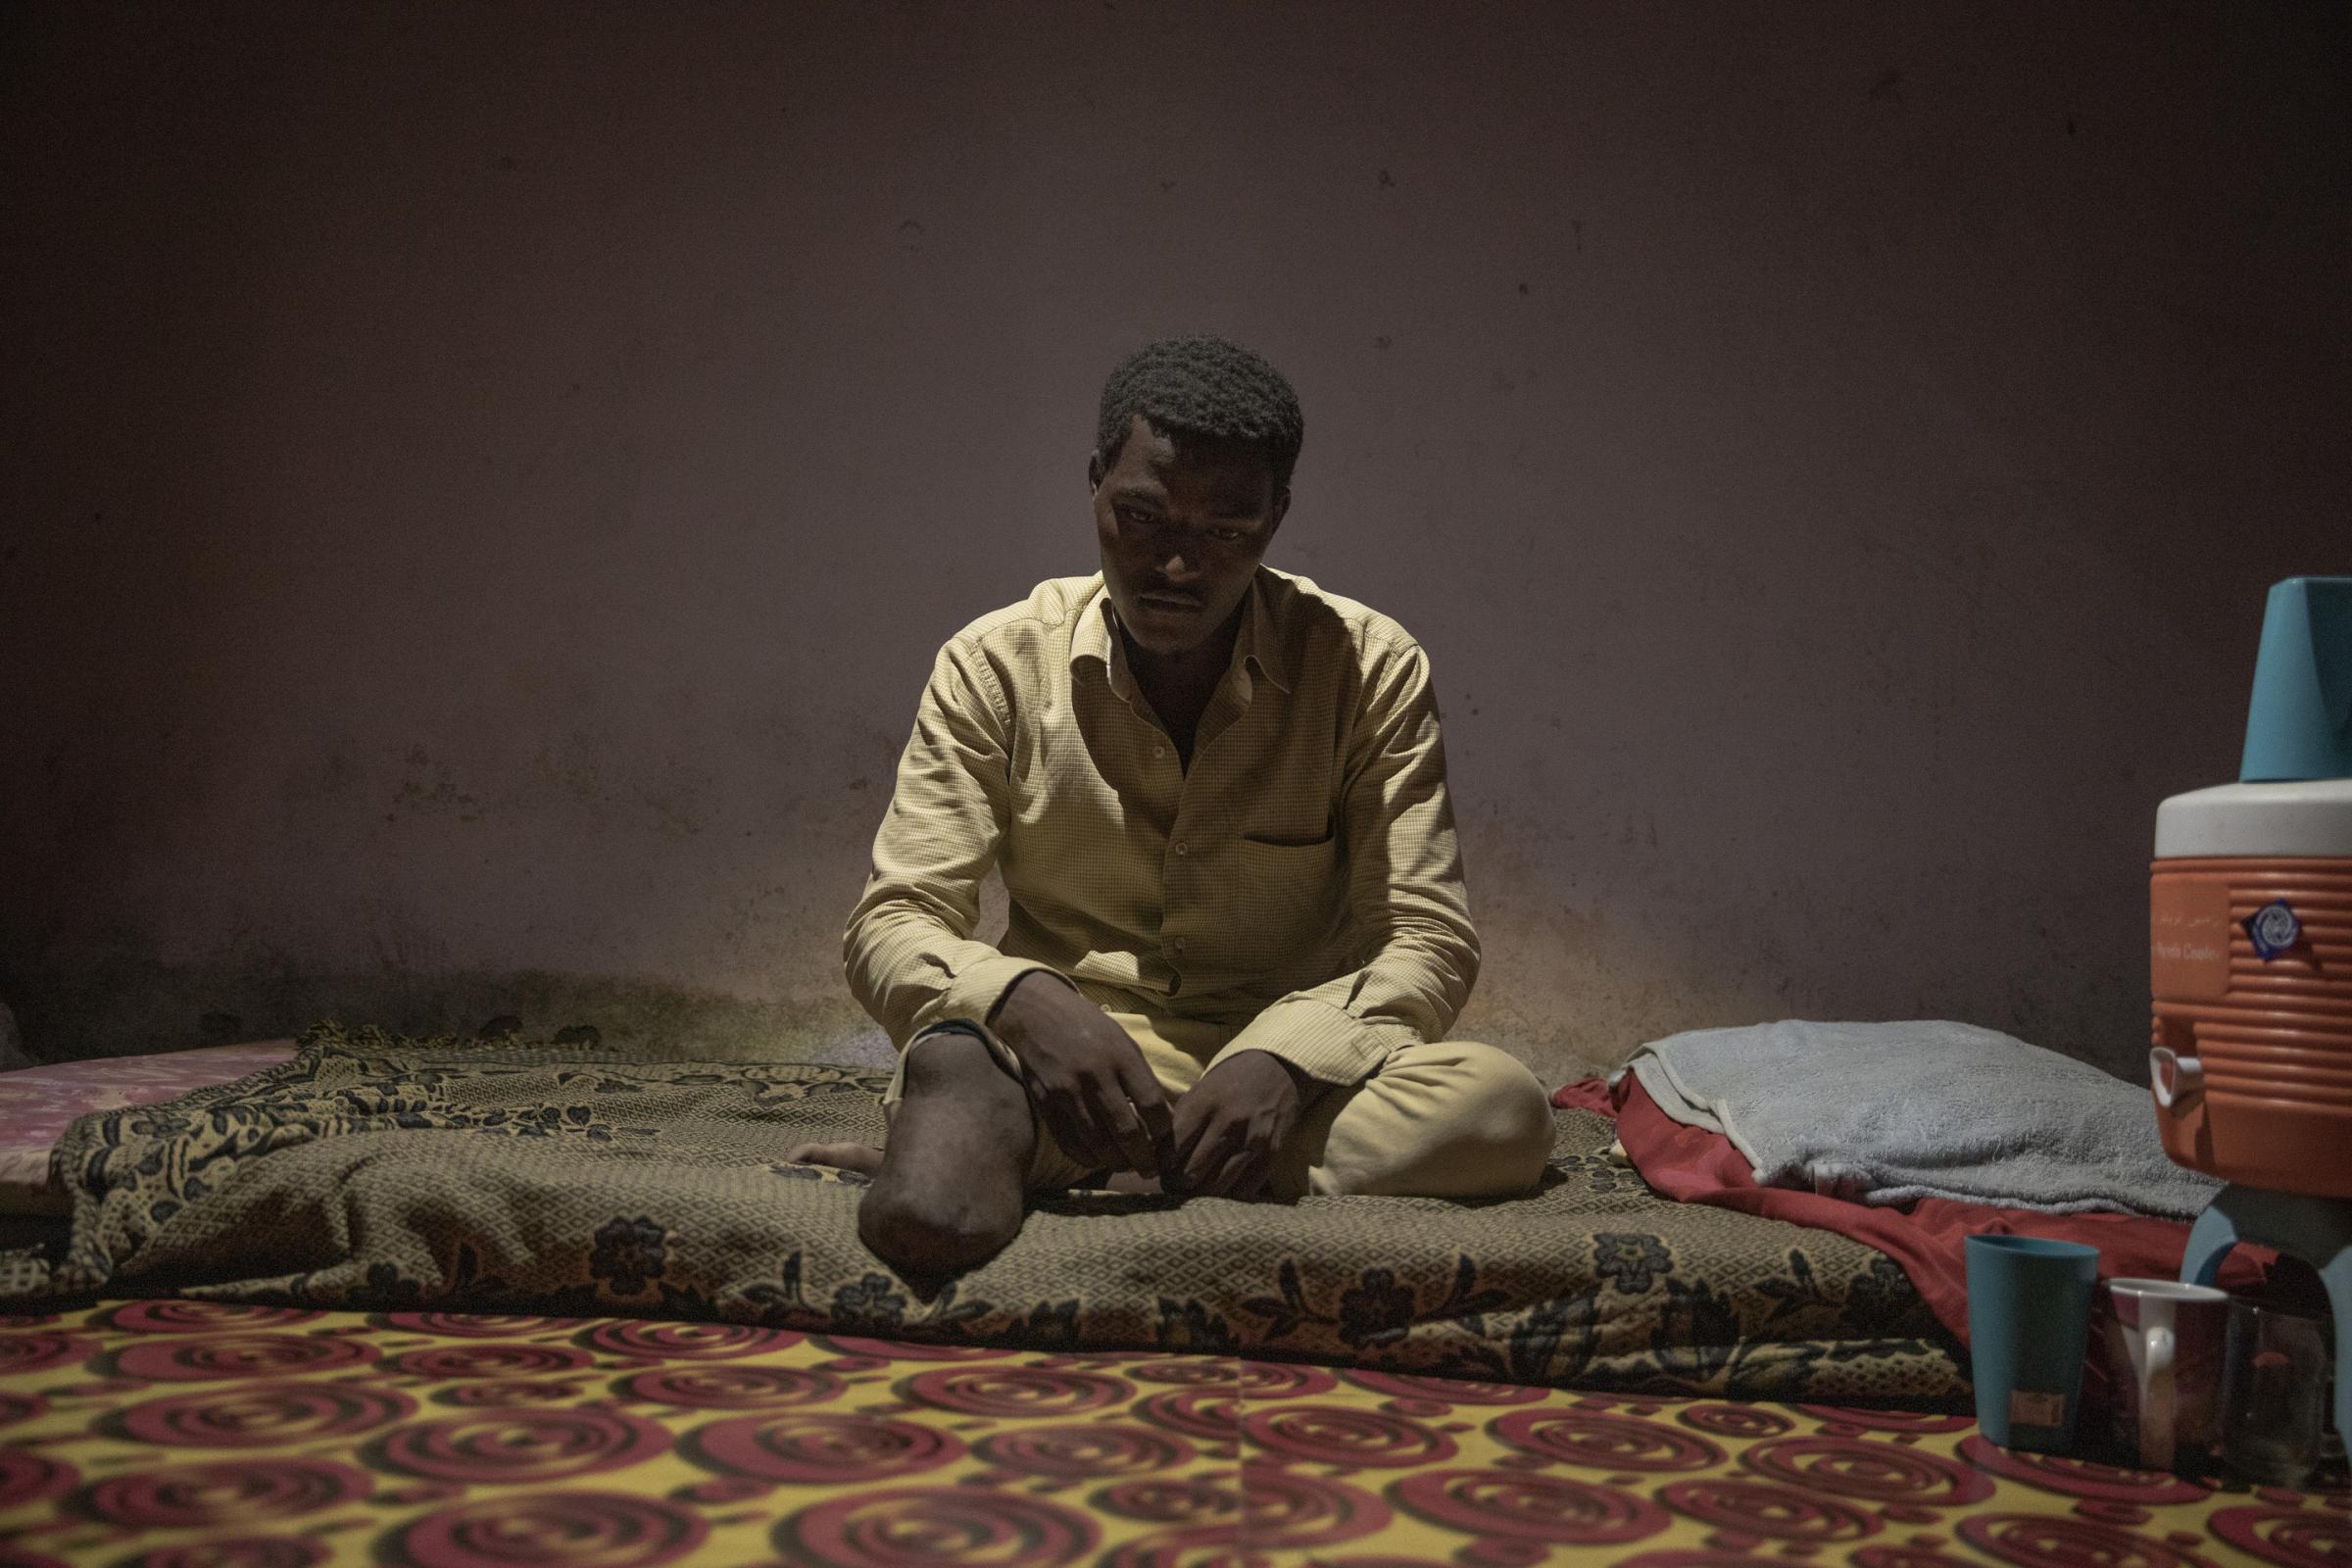  Abdul-Rahman Taha, 17, shows his amputated leg, at his home, in Basateen, a district of Aden, Yemen. When he landed at Ras al-Ara, traffickers took him and 50 other migrants to a holding cell, demanding phone numbers. Taha couldn&#39;t ask his father for more money so he told them he didn&#39;t have a phone number. One night, a captor beat his right leg with a steel rod. Taha passed out and was dumped in the desert with three dead migrants by traffickers. 